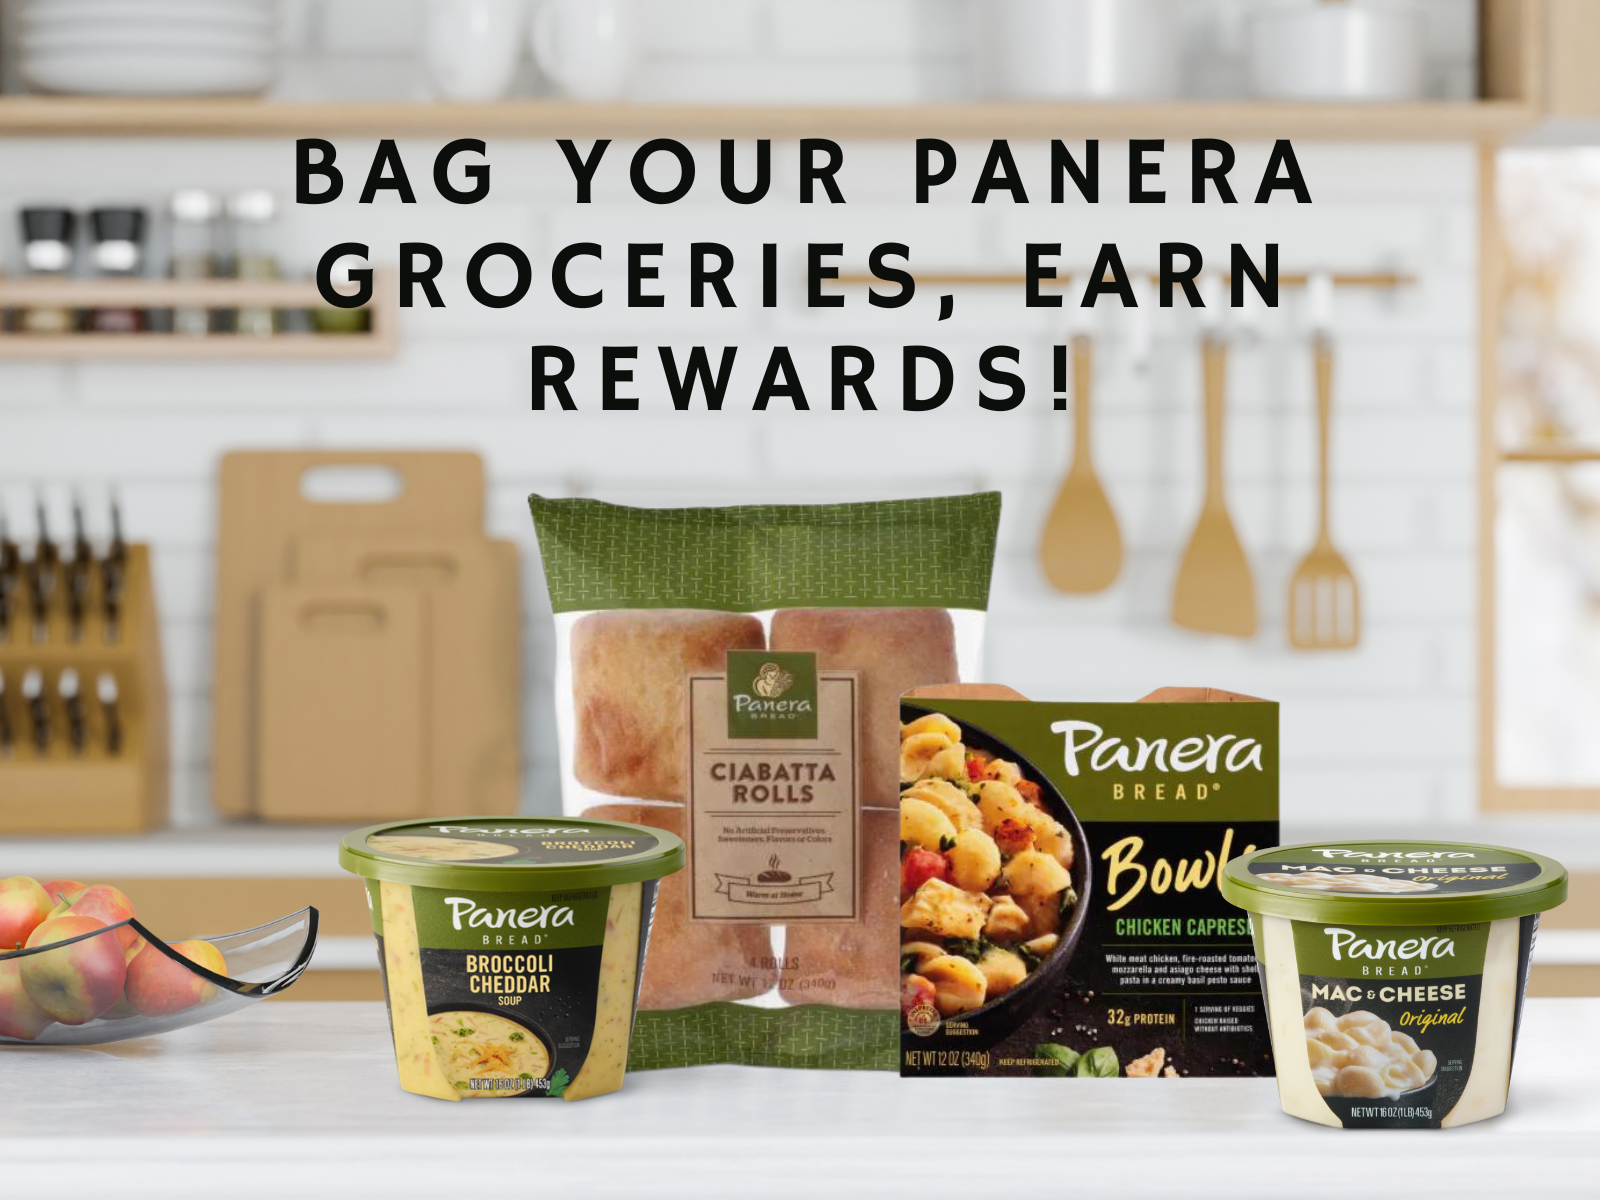 Spend $20 On Panera Groceries At Kroger And Earn A $5 e-Gift Card